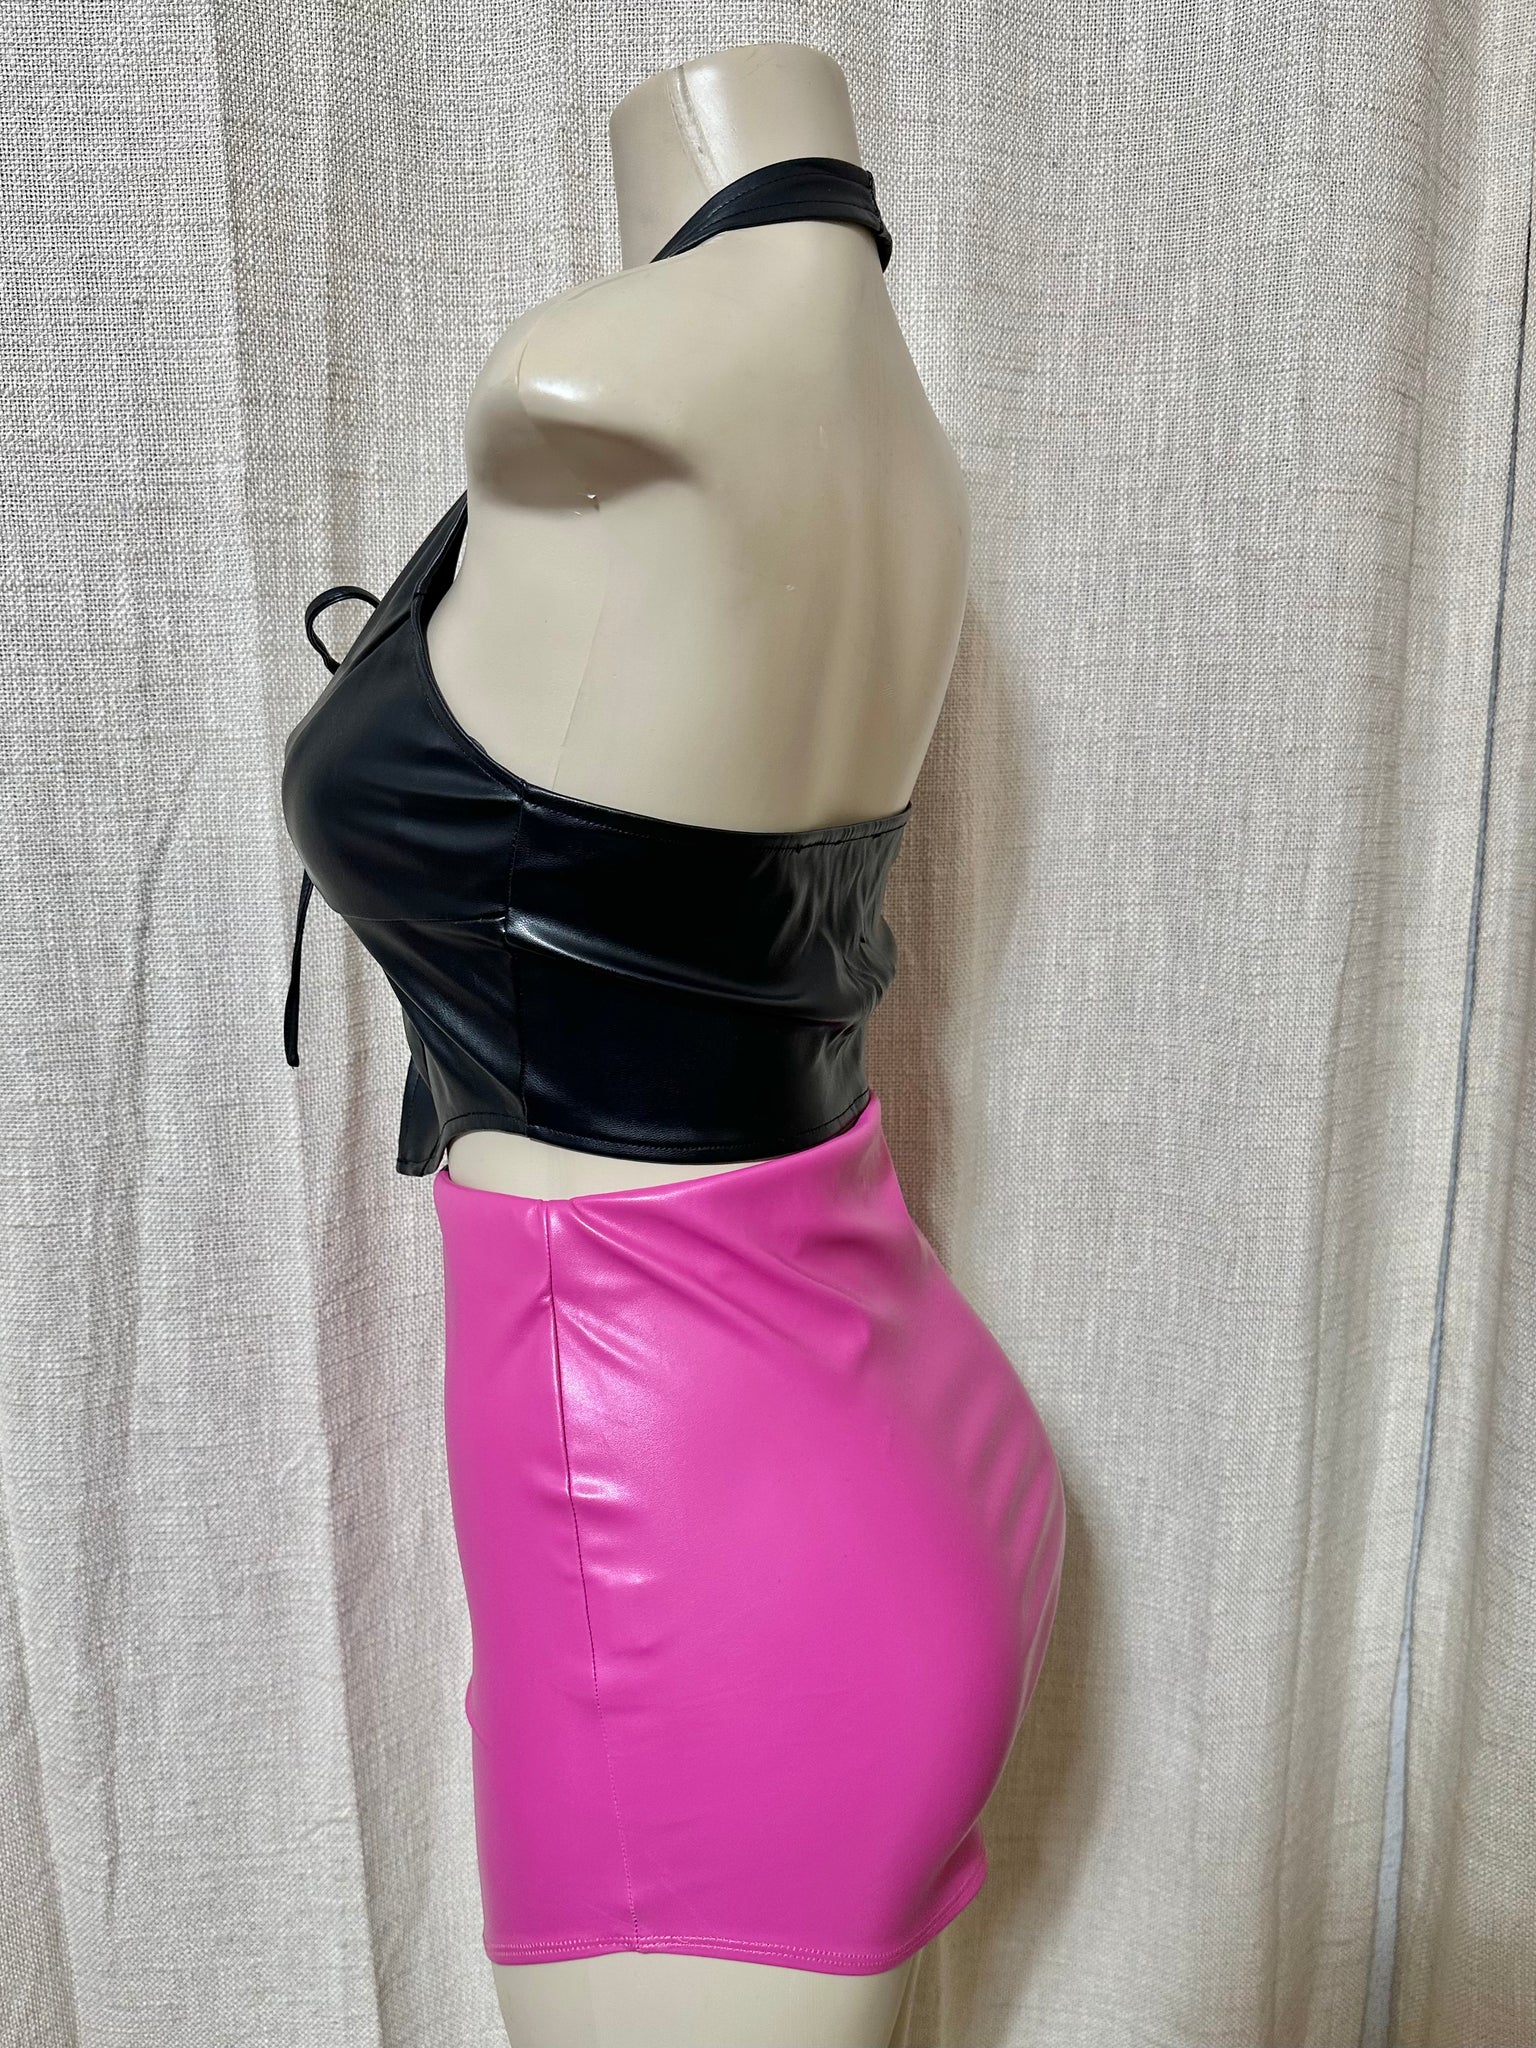 The “Pretty In Pink” Faux Leather Mini